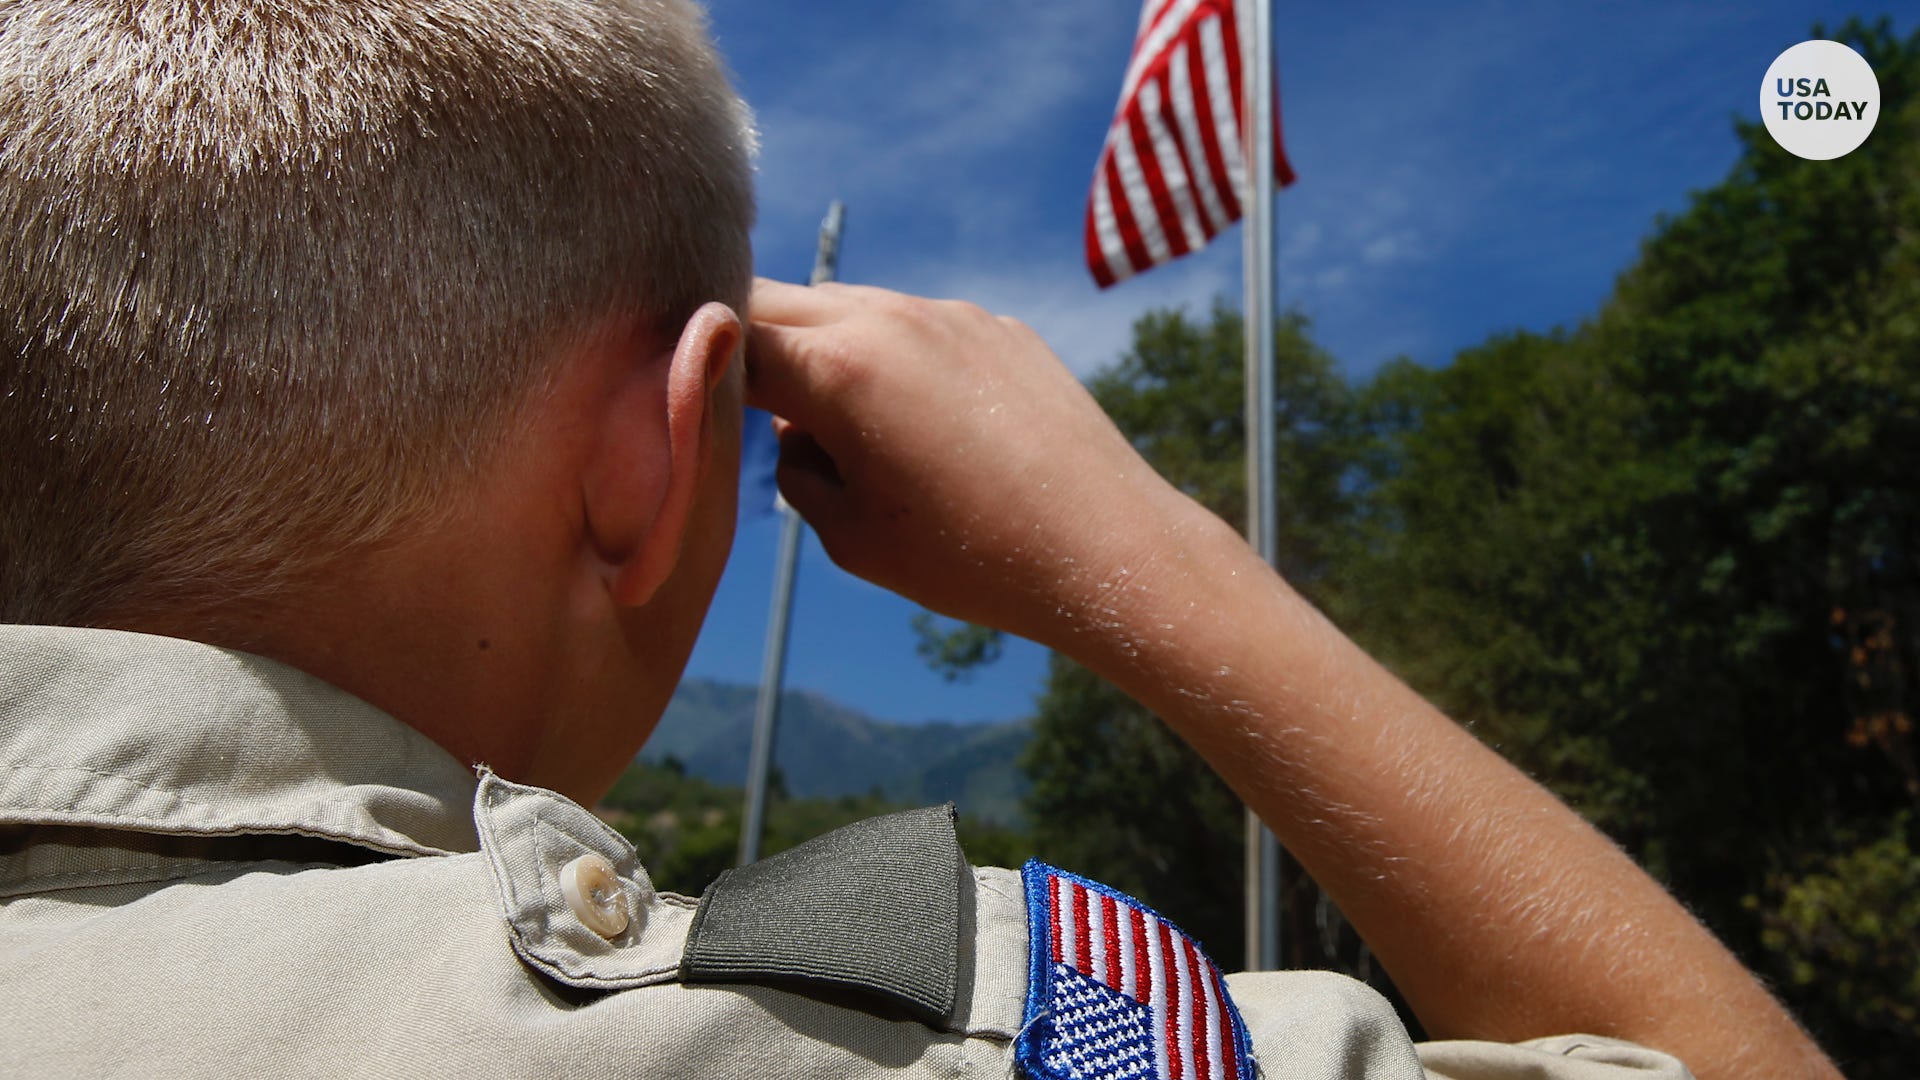 Boy Scouts offer sexual abuse victims historic 850 million settlement